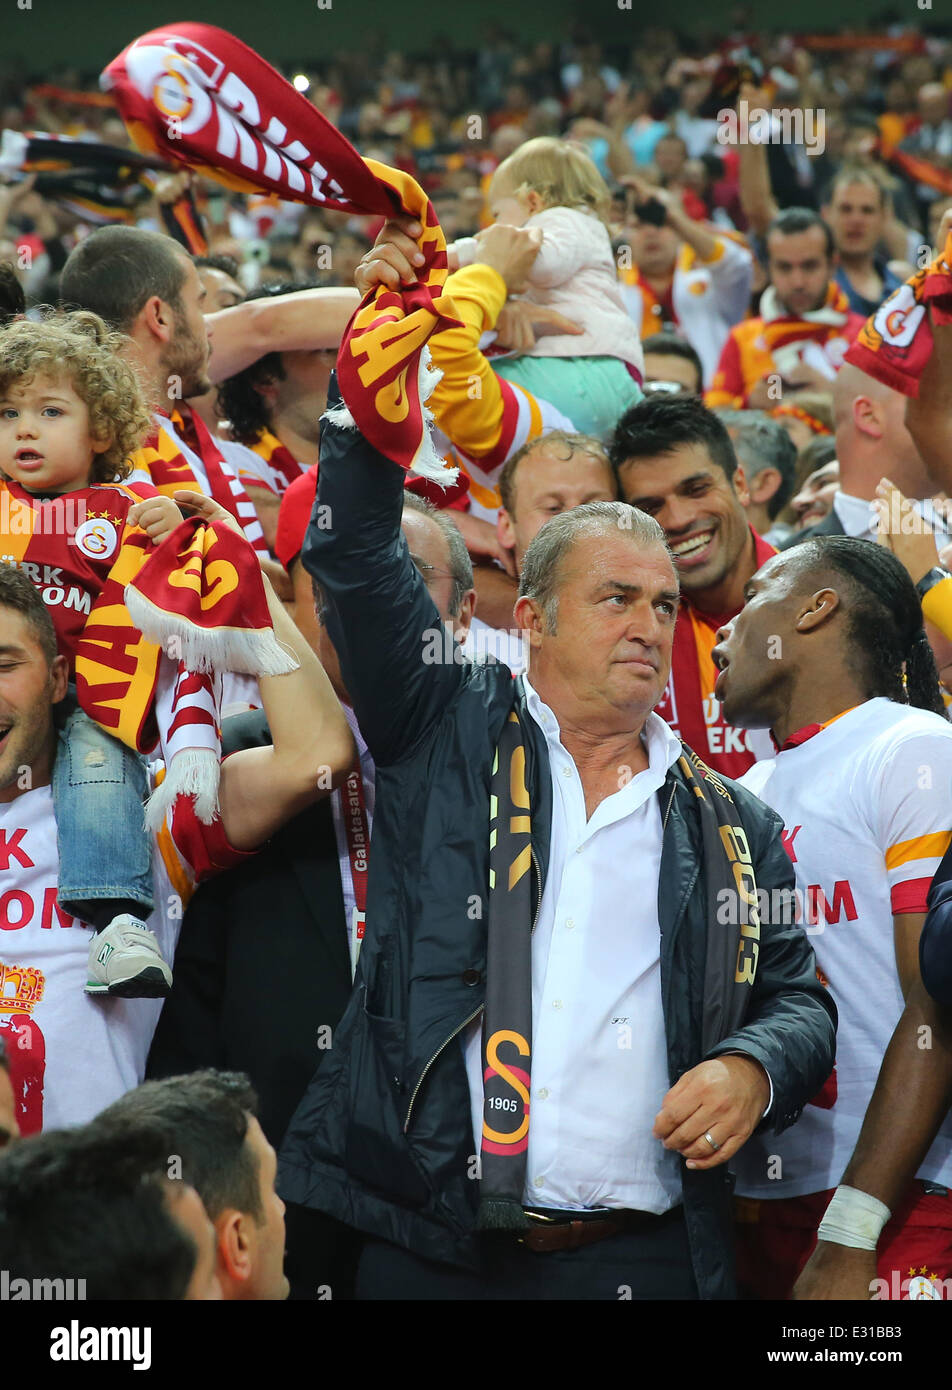 Galatasaray Football club win their 19th Spor Toto Super League title after victory over Sivasspor at Turk Telekom Arena Stadium in Istanbul Match Score: Galatasaray 4 - Sivasspor 2  Featuring: Fatih Terim Where: Istanbul, Turkey When: 05 May 2013  **** Stock Photo